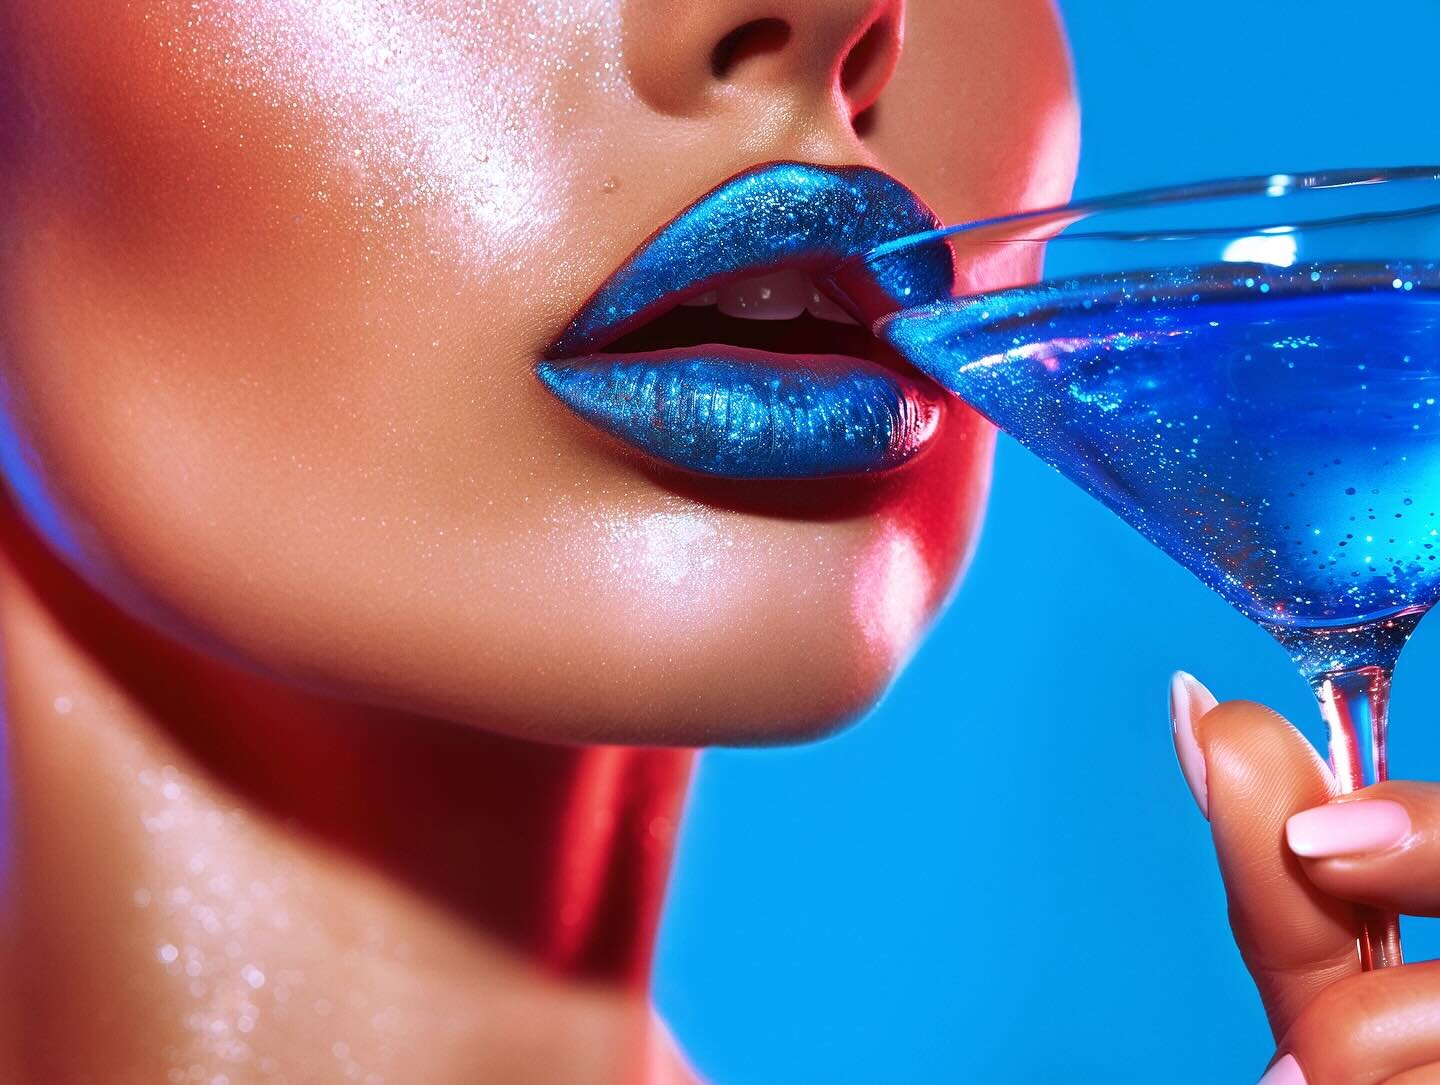 The deeper you dive, the more secrets you&rsquo;ll find. This drink has a story to tell&hellip; #bluedrinks #sparklelife #glitterlips